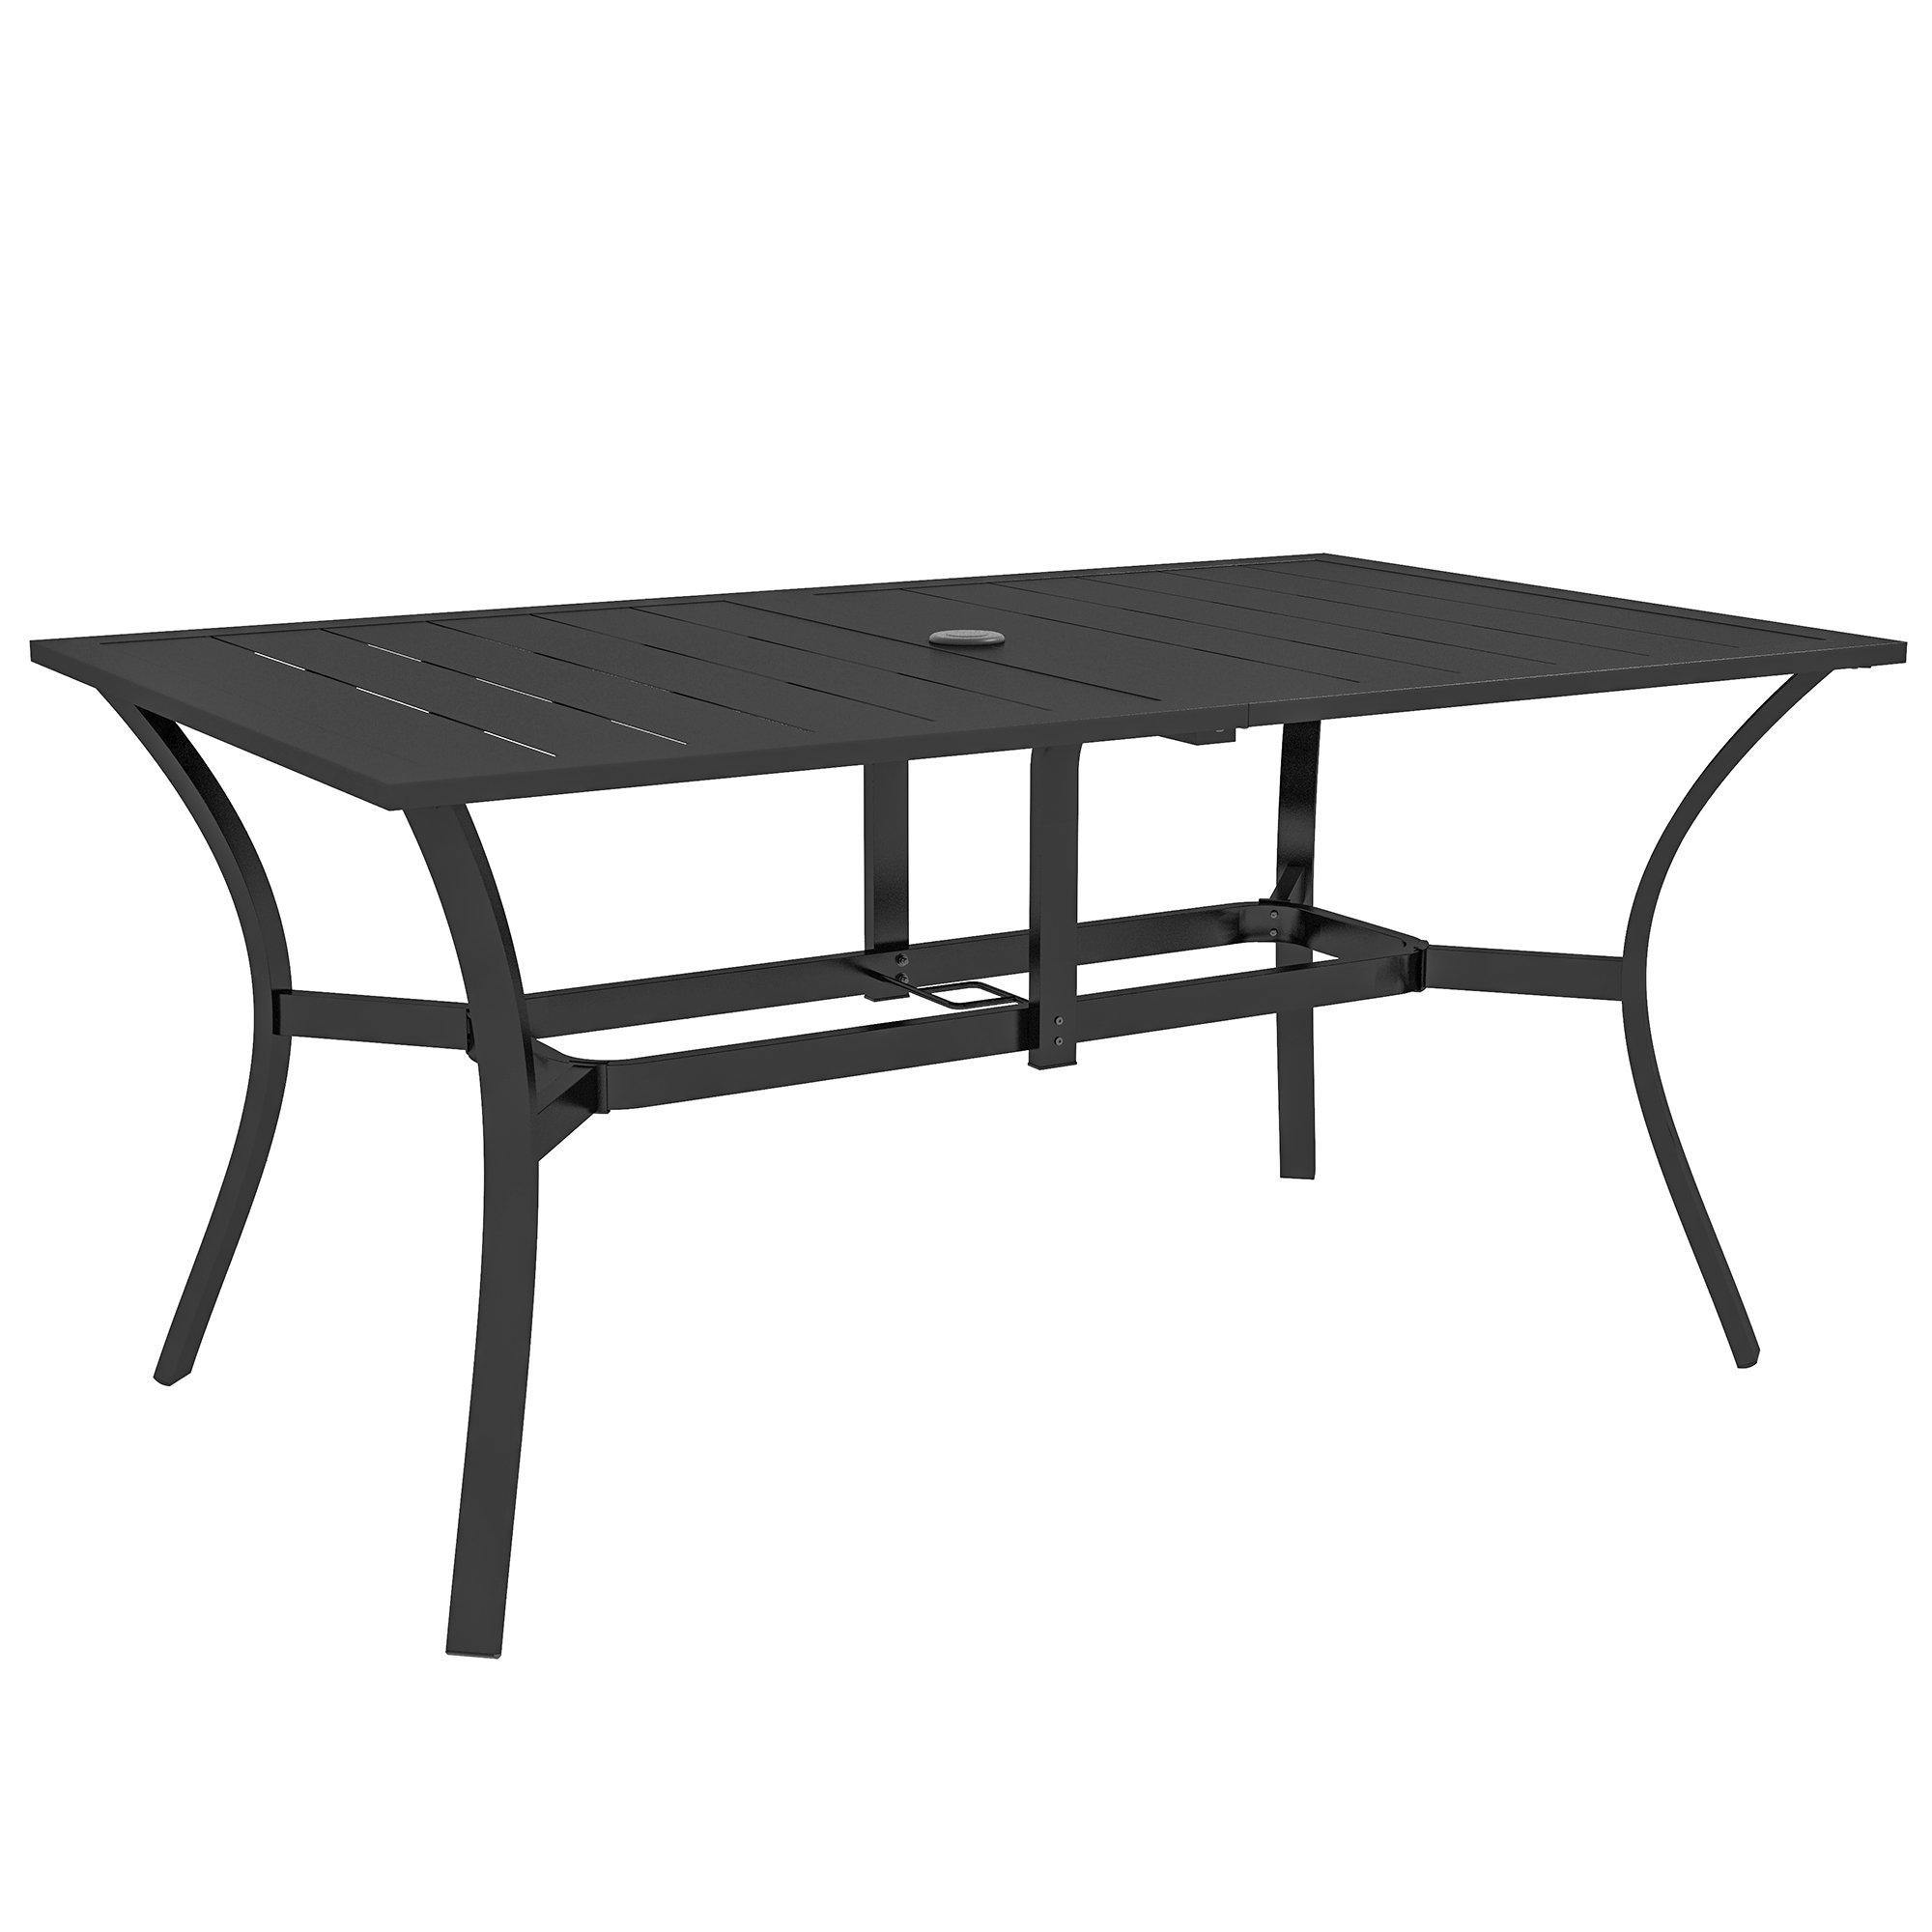 Garden Table Rectangle Patio Table with Steel Frame Slat Tabletop 150cm x 90cm